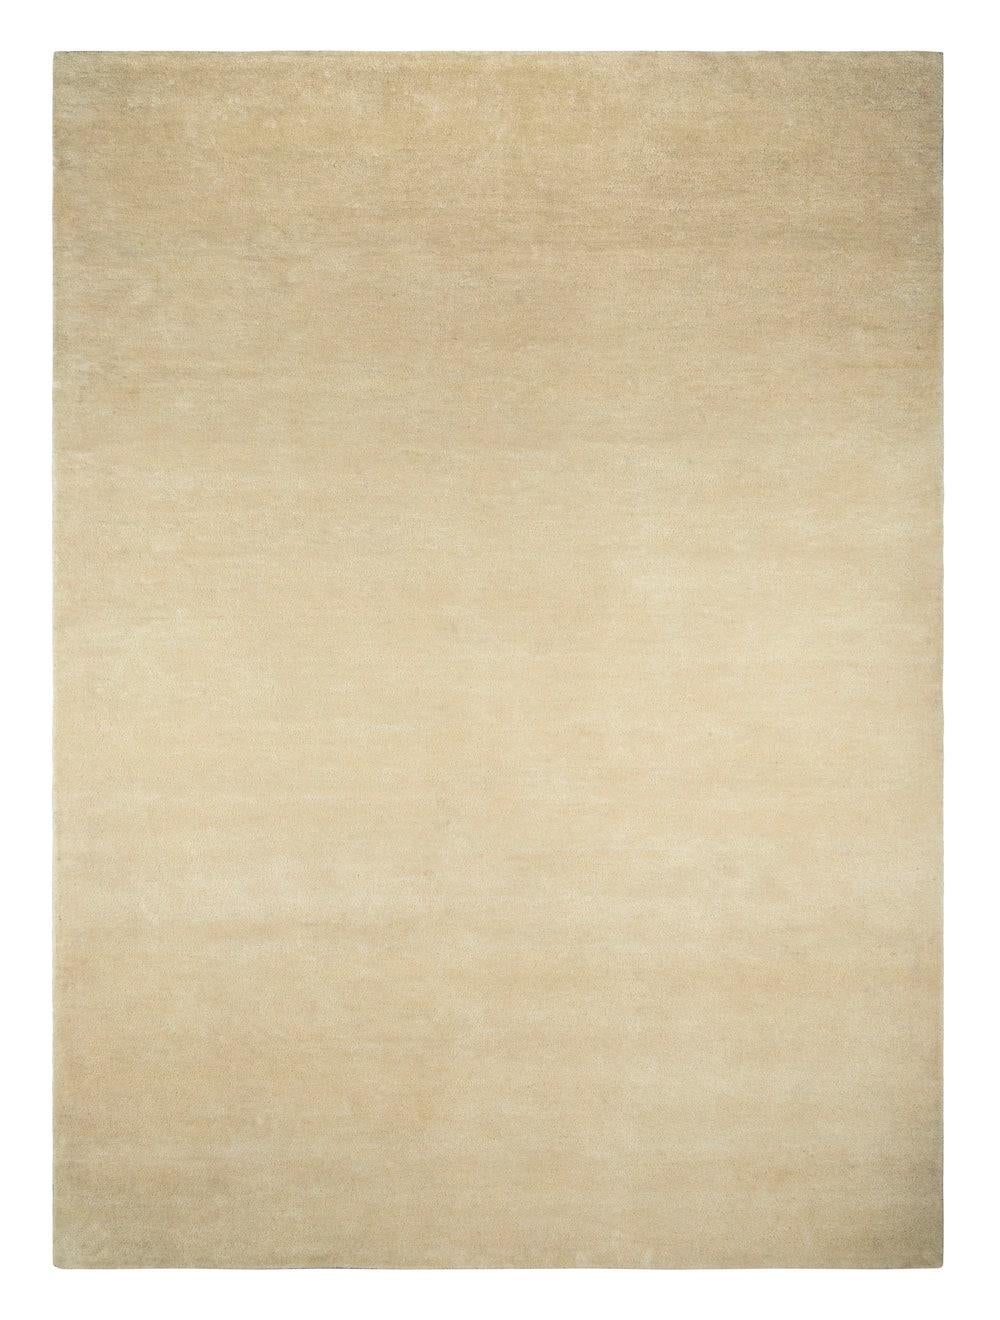 Pastel Yellow RePeat Carpet by Massimo Copenhagen.
Handtufted
Materials: 100% Recycled PET, Cotton.
Dimensions: W 250 x H 350 cm.
Available colors: Graphite, Cream, Beige, Pistachio, and Pastel Yellow. 
Other dimensions are available: 160x230